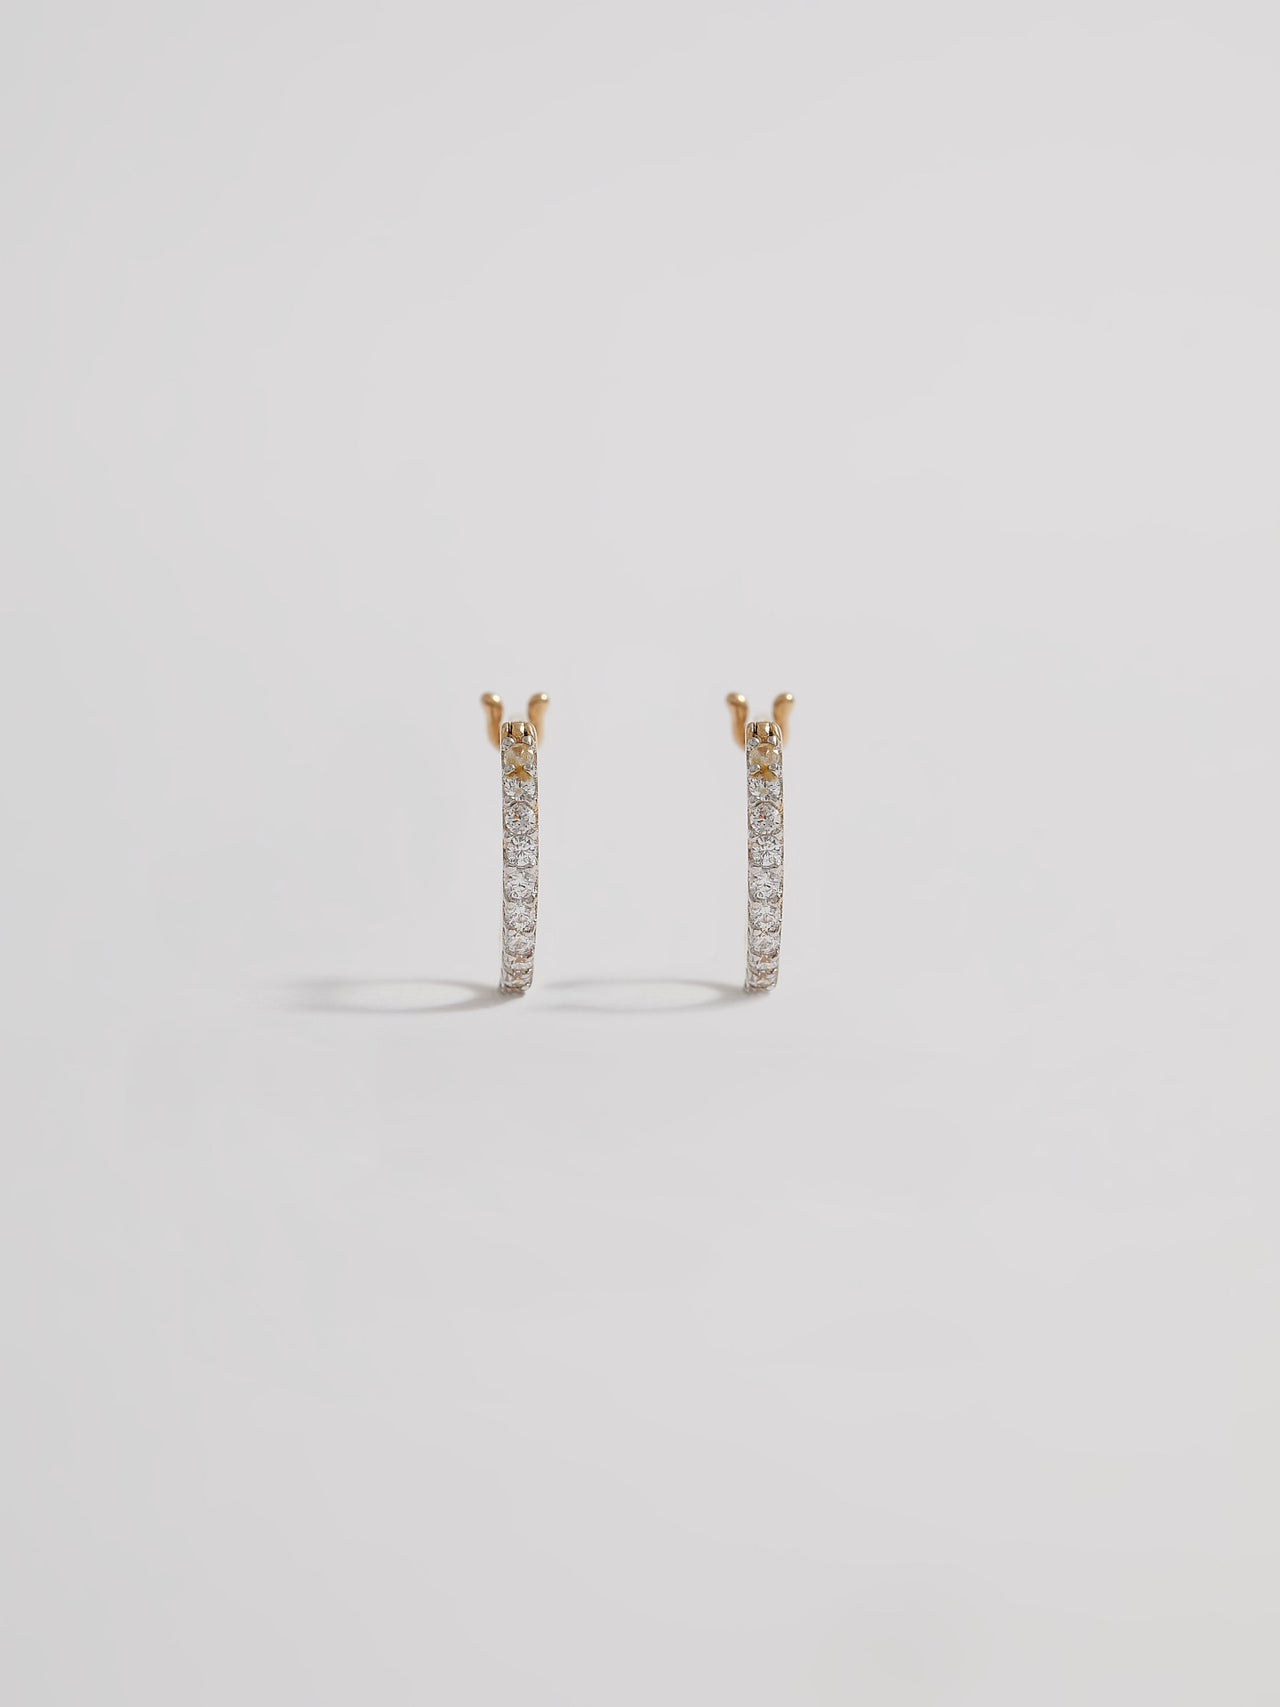 Product shot of the Petite Pave Huggies (14KT Yellow Gold 10mm Diameter 1.1mm CZ) Background: Grey backdrop